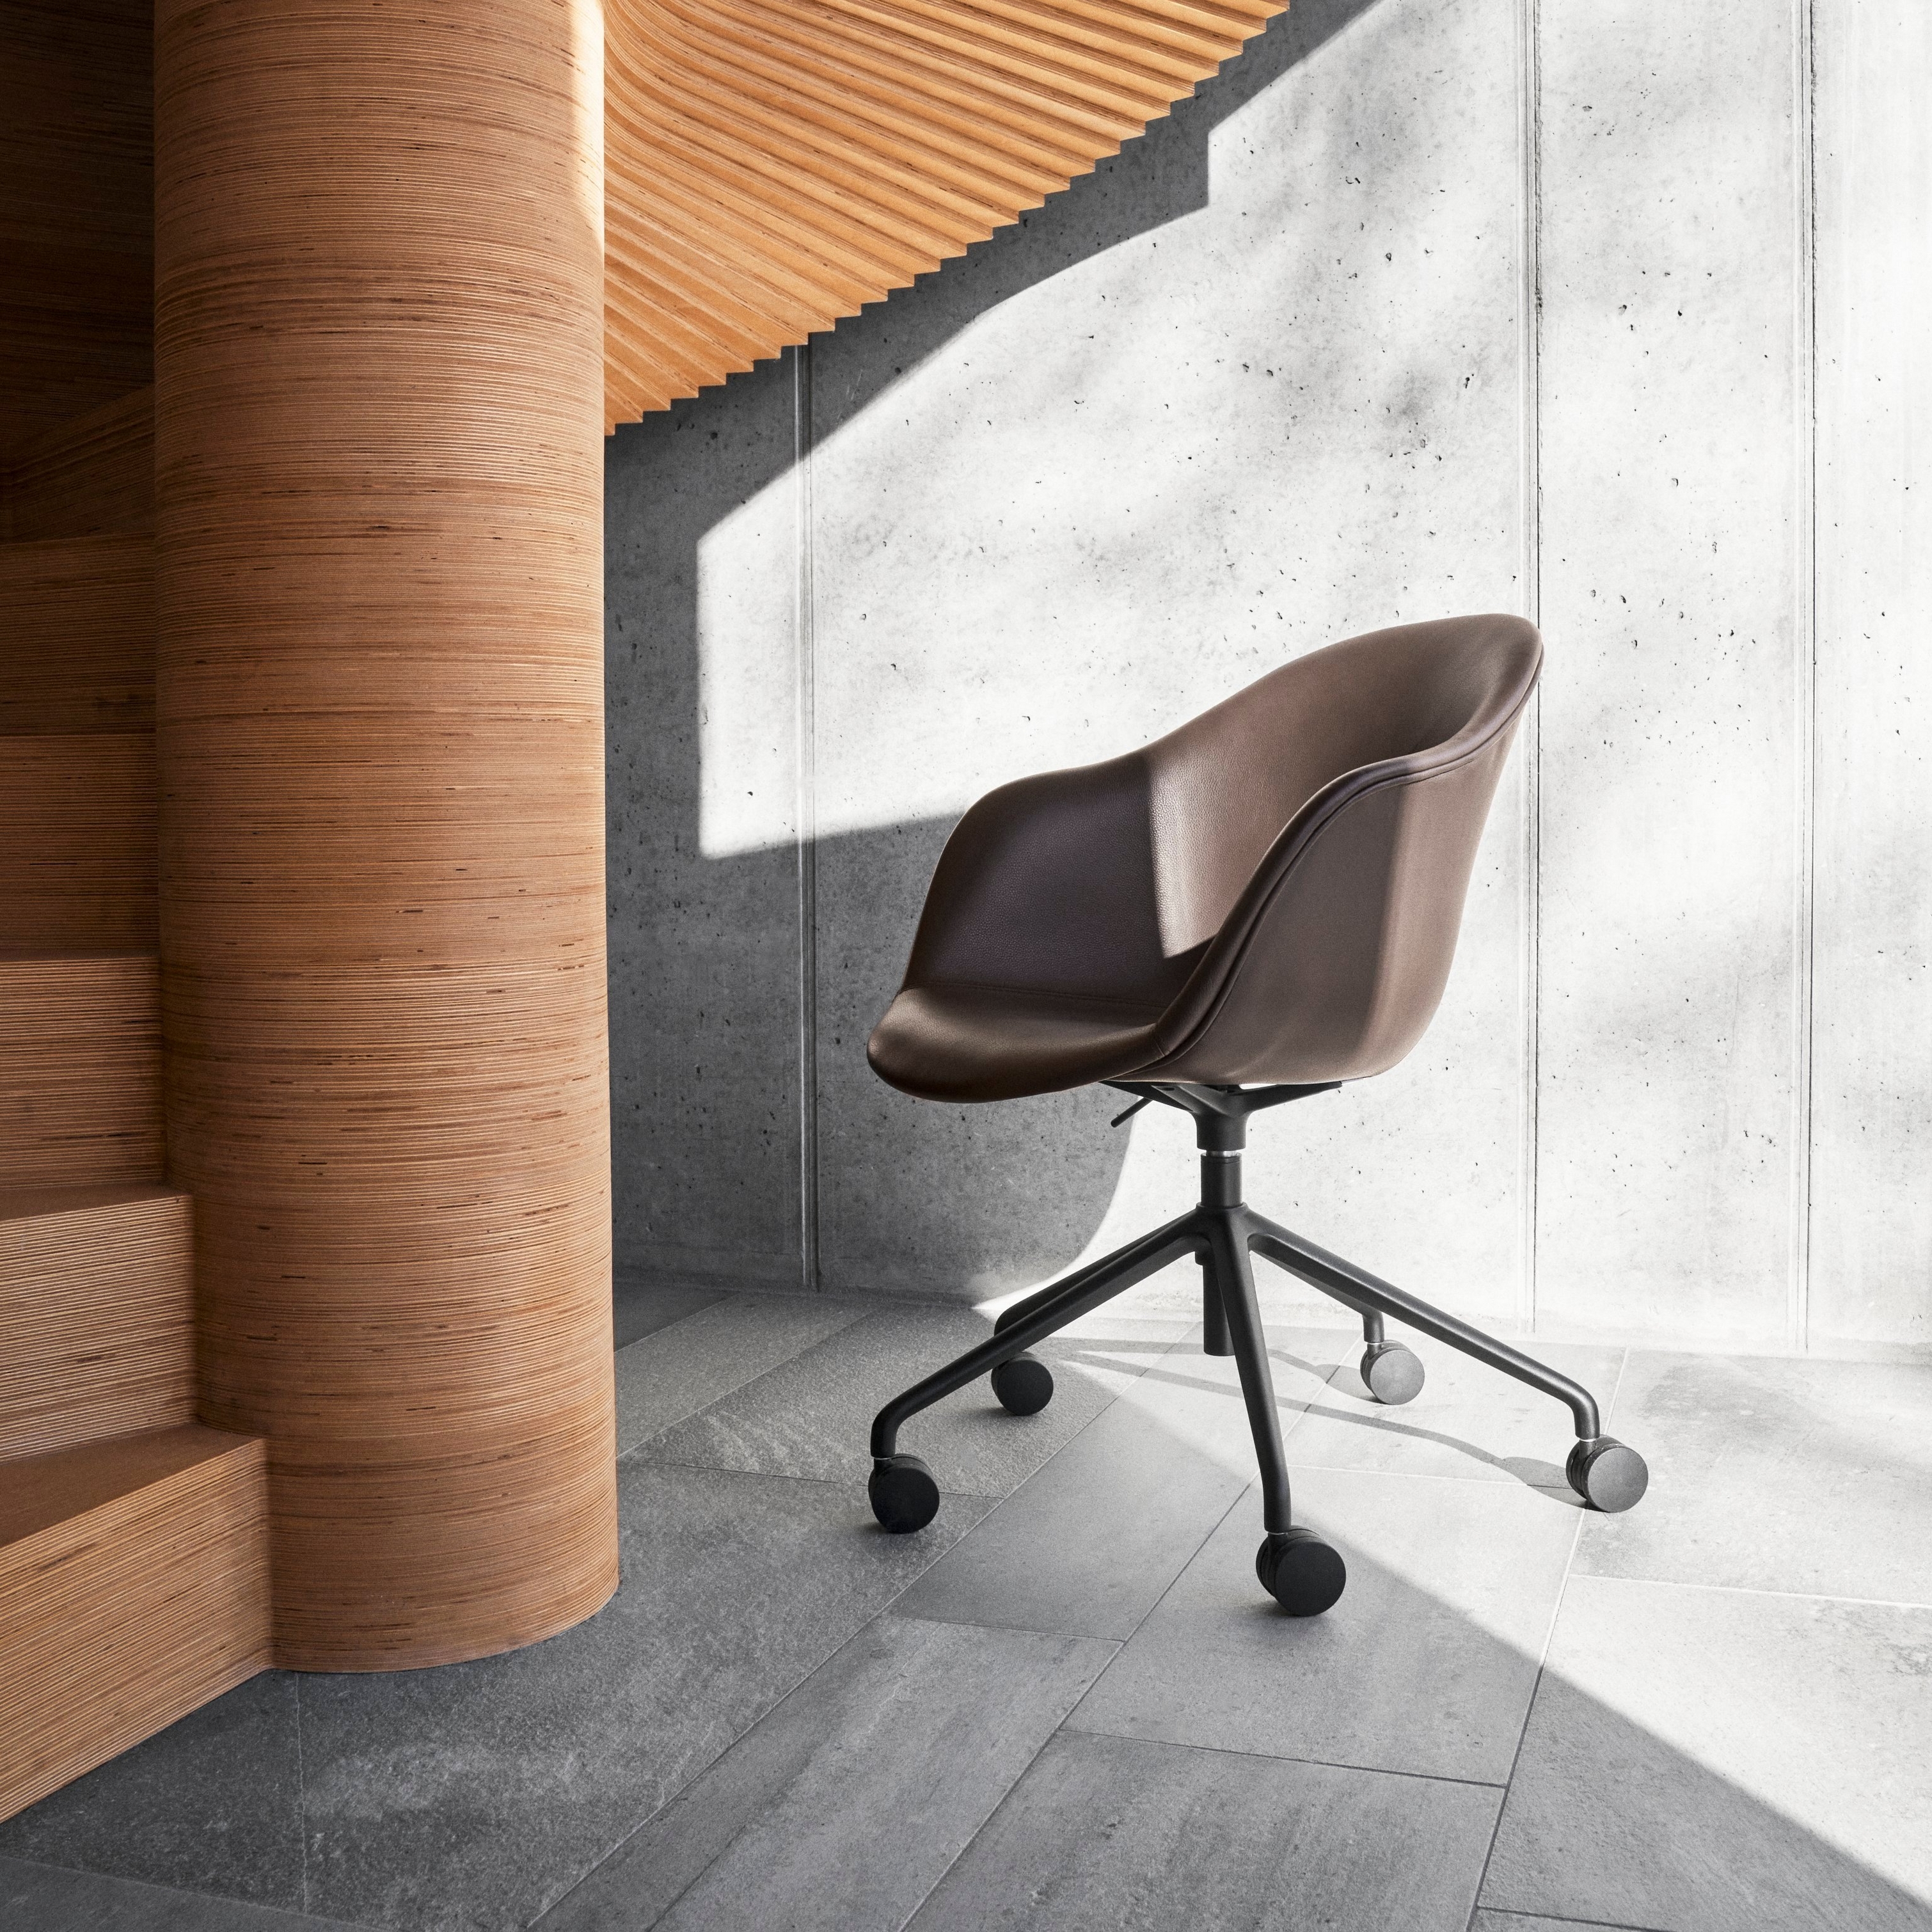 The Adelaide office chair styled next to a spiral staircase